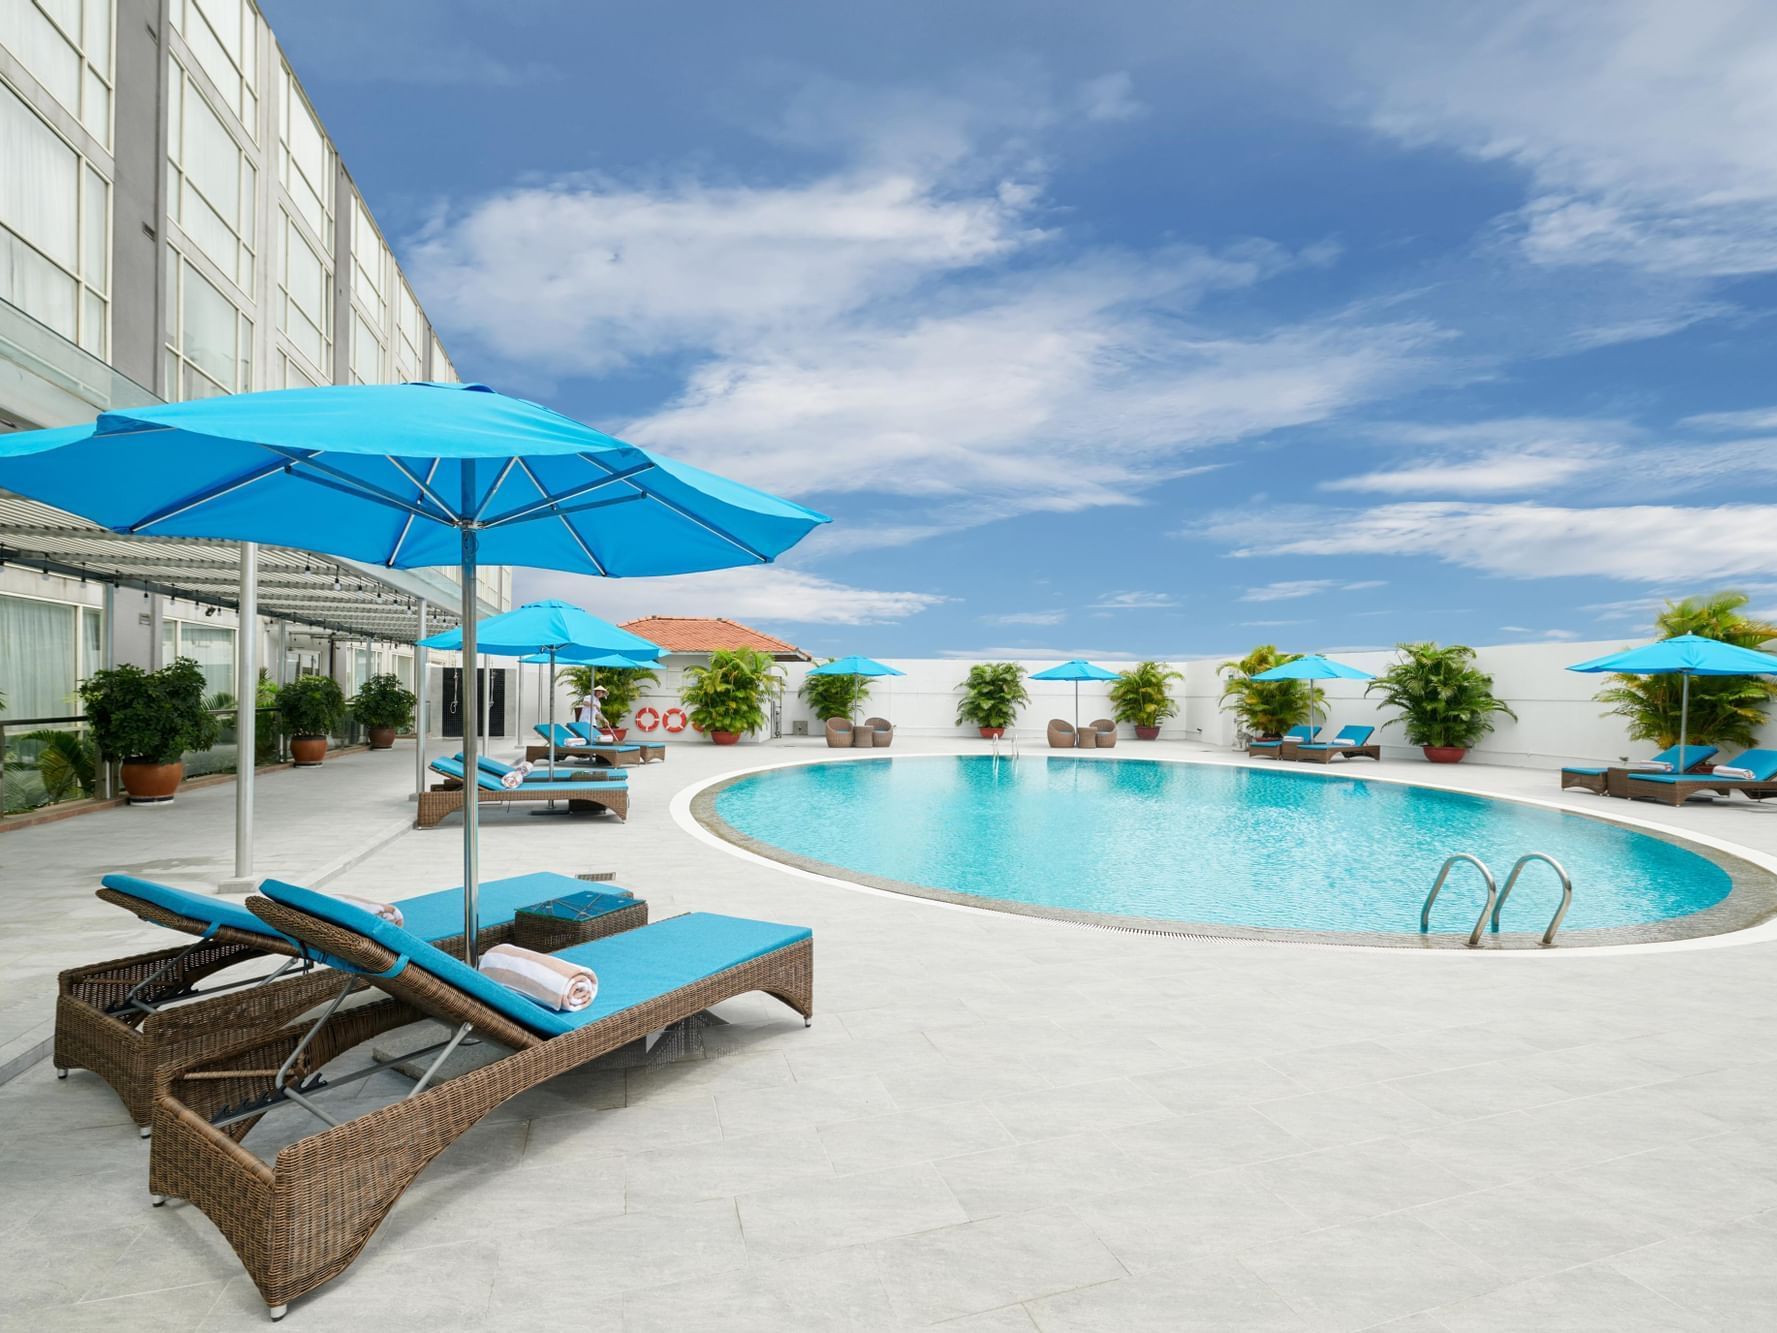 Outdoor jacuzzi with pool beds at Eastin Hotels